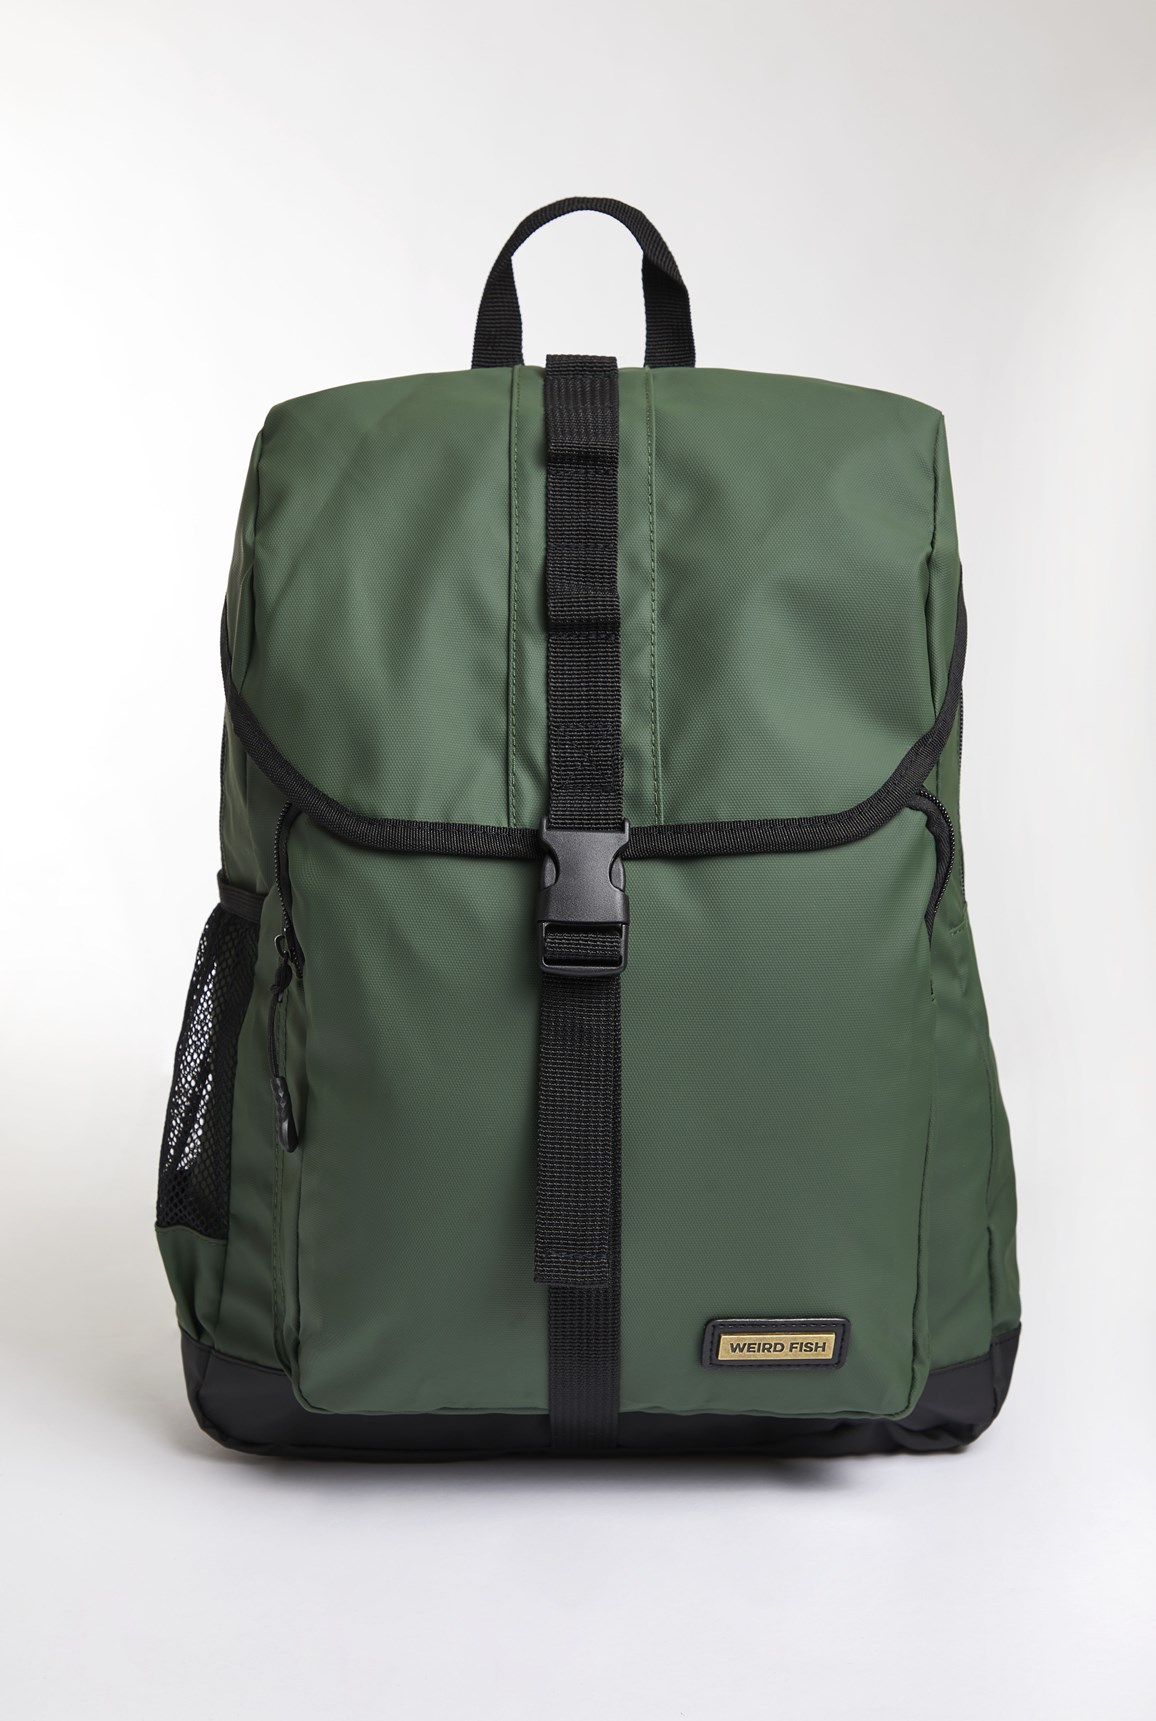 Weird Fish Clarence Nylon Back Pack Dark Olive Size ONE